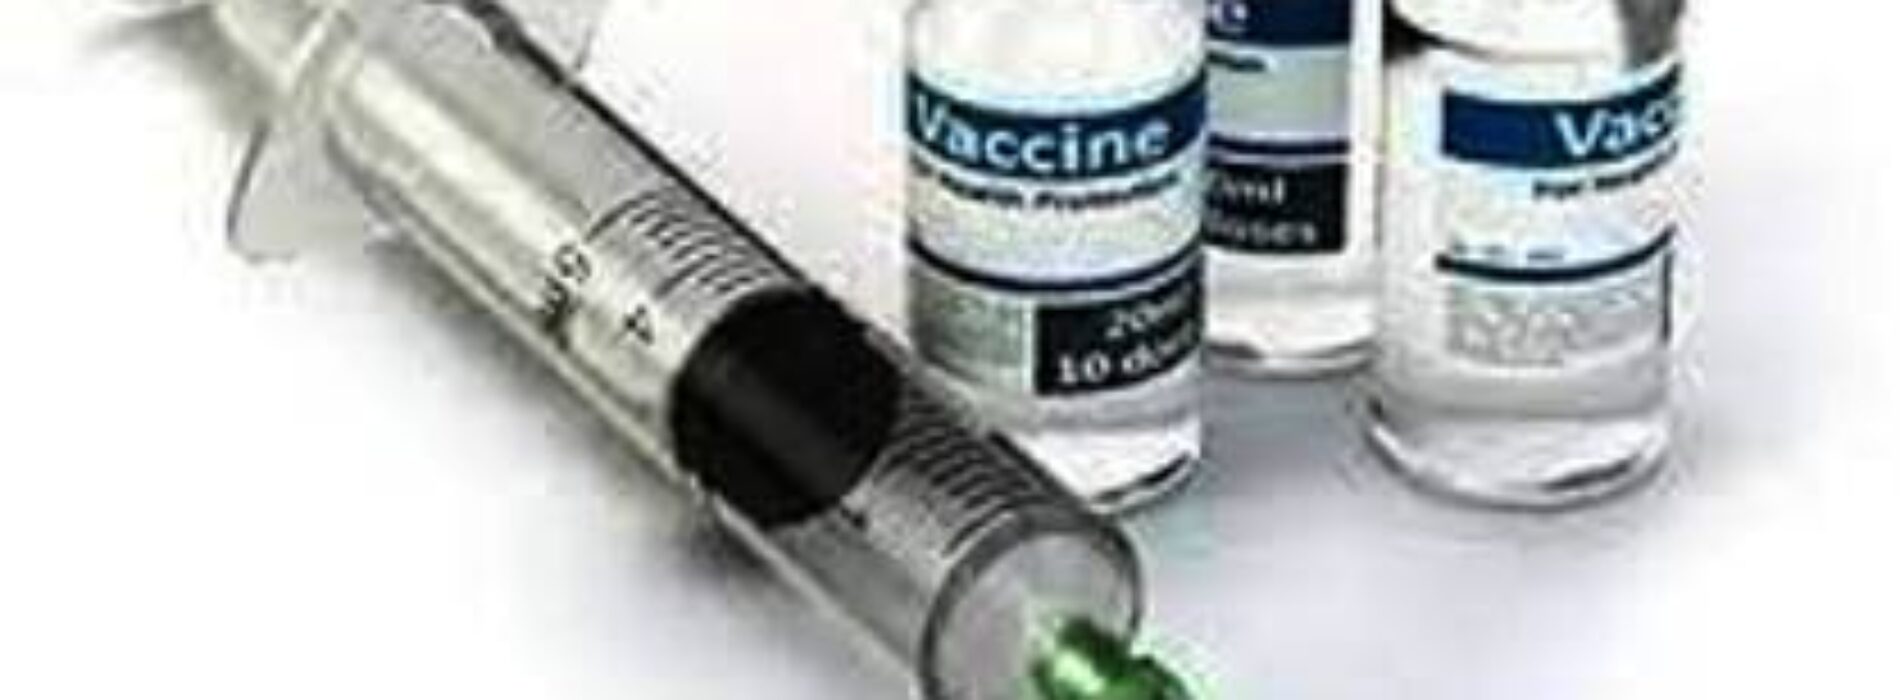 No vaccination’ against avian influenza, says FG 